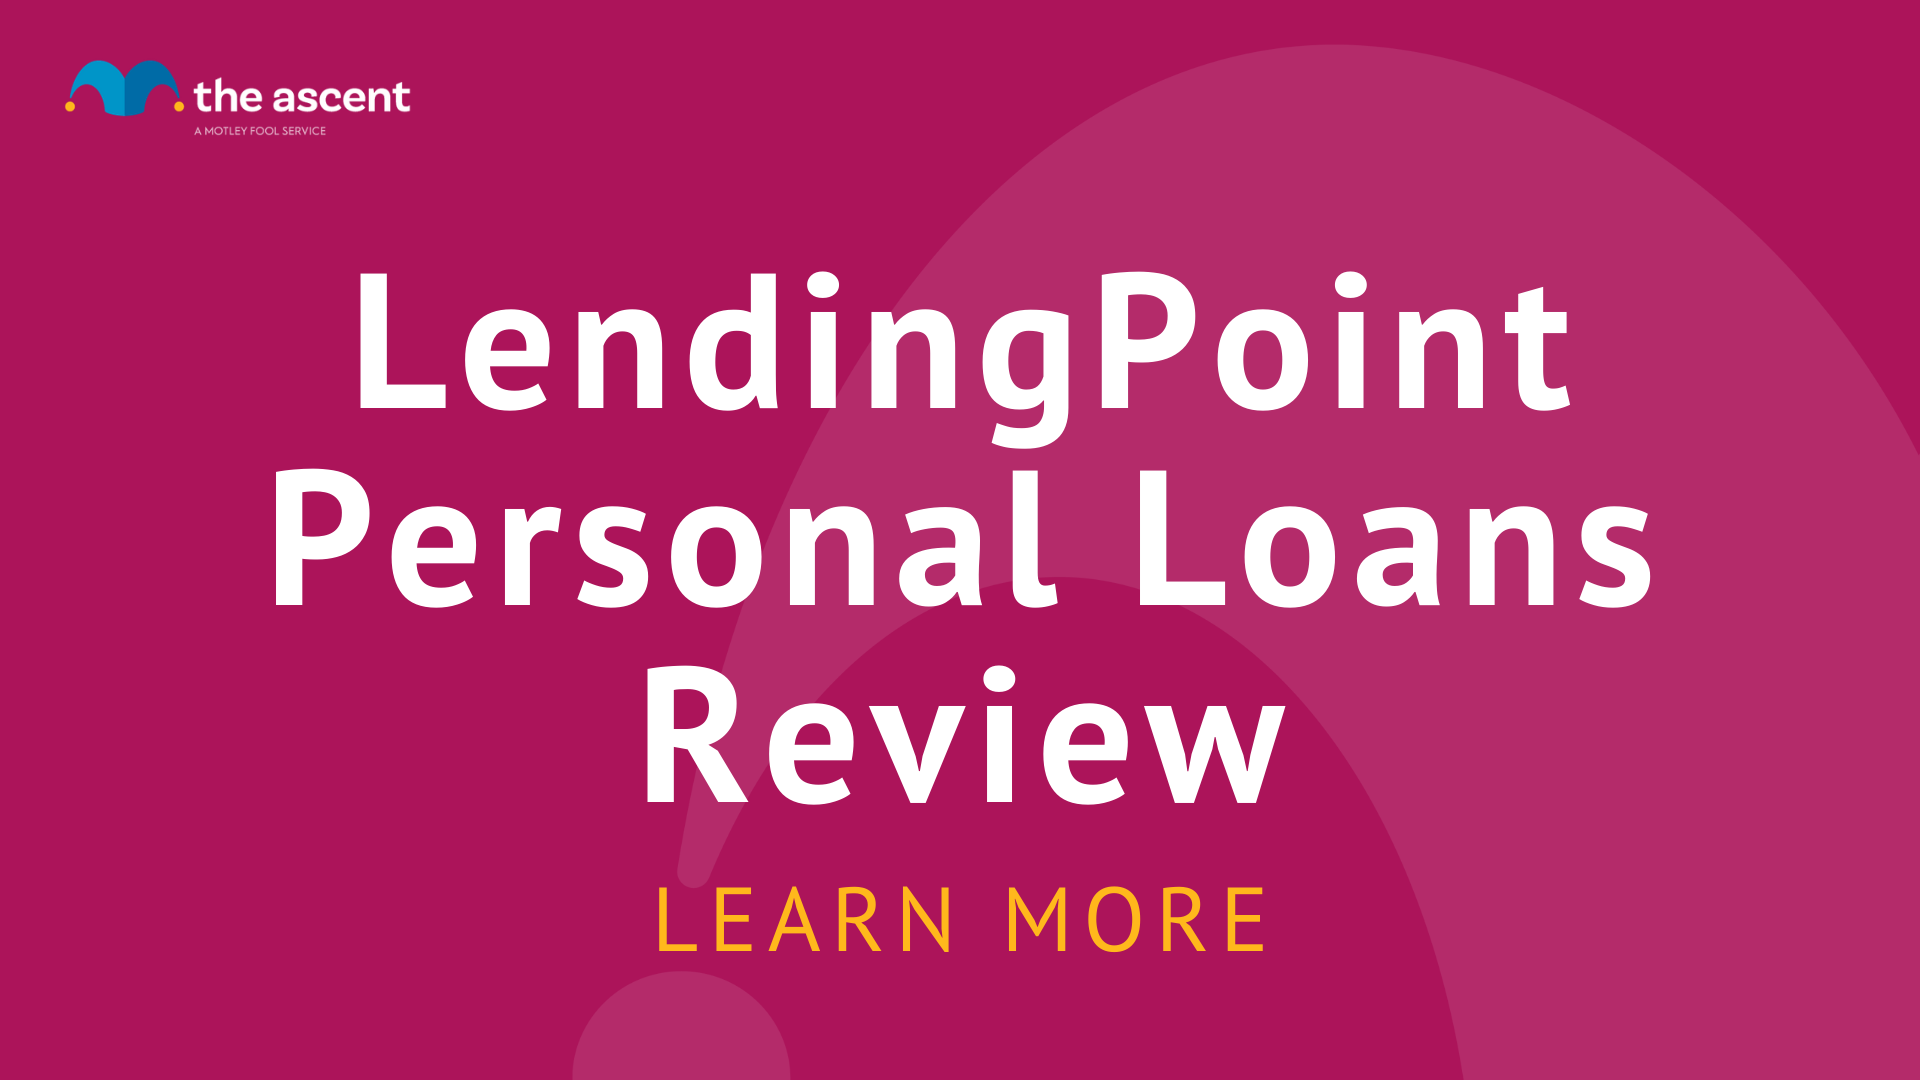 https://www.fool.com/the-ascent/personal-loans/lendingpoint-personal-loans-review/